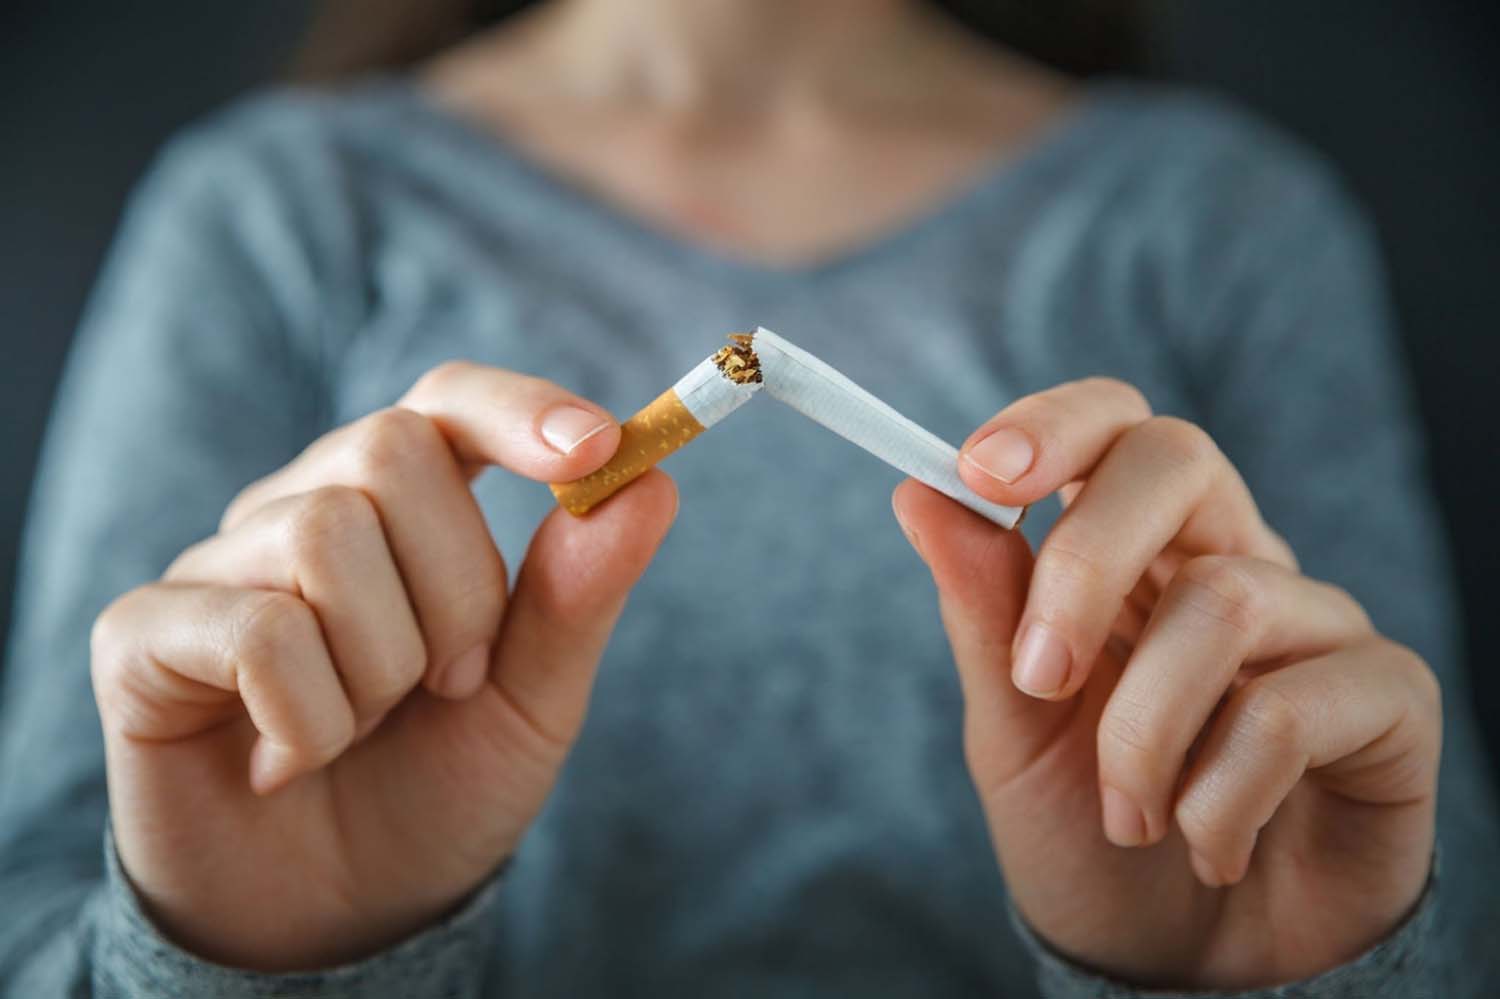 Smoking and Anxiety: The Link Between Cigarettes and Mental Health